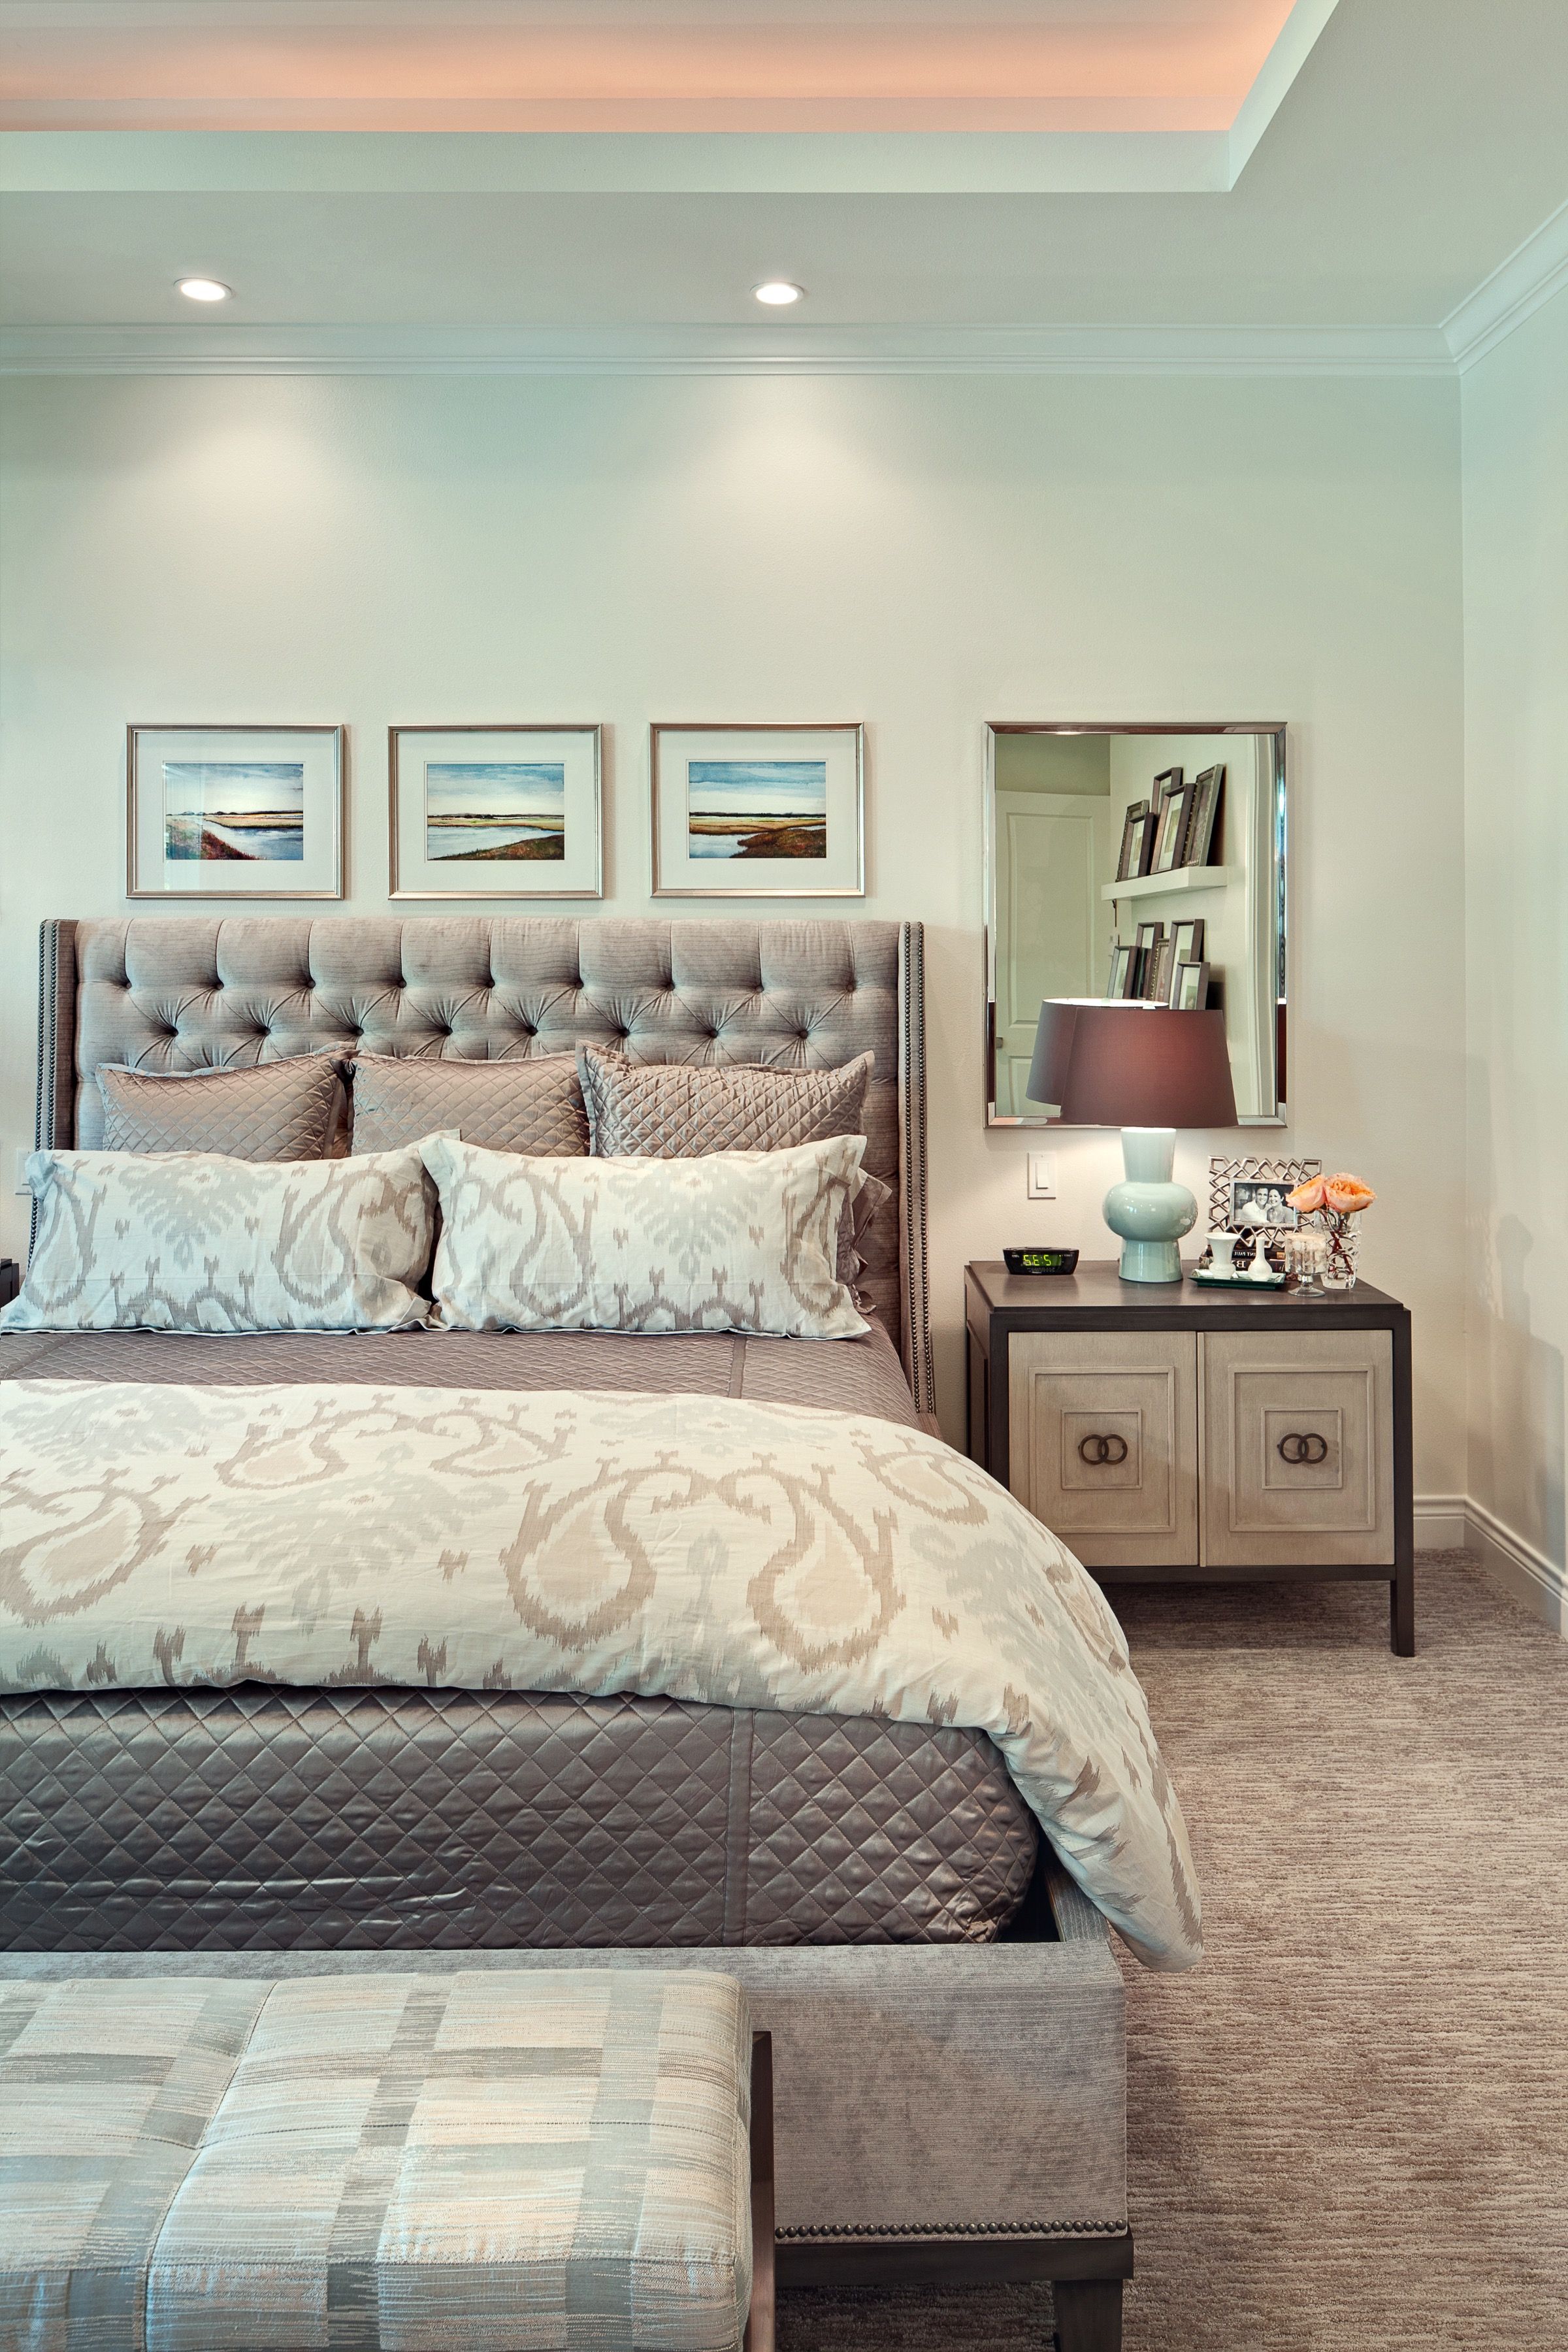 Traditional Bedroom With Tufted Headboard And Illuminated Tray Ceiling (View 31 of 32)